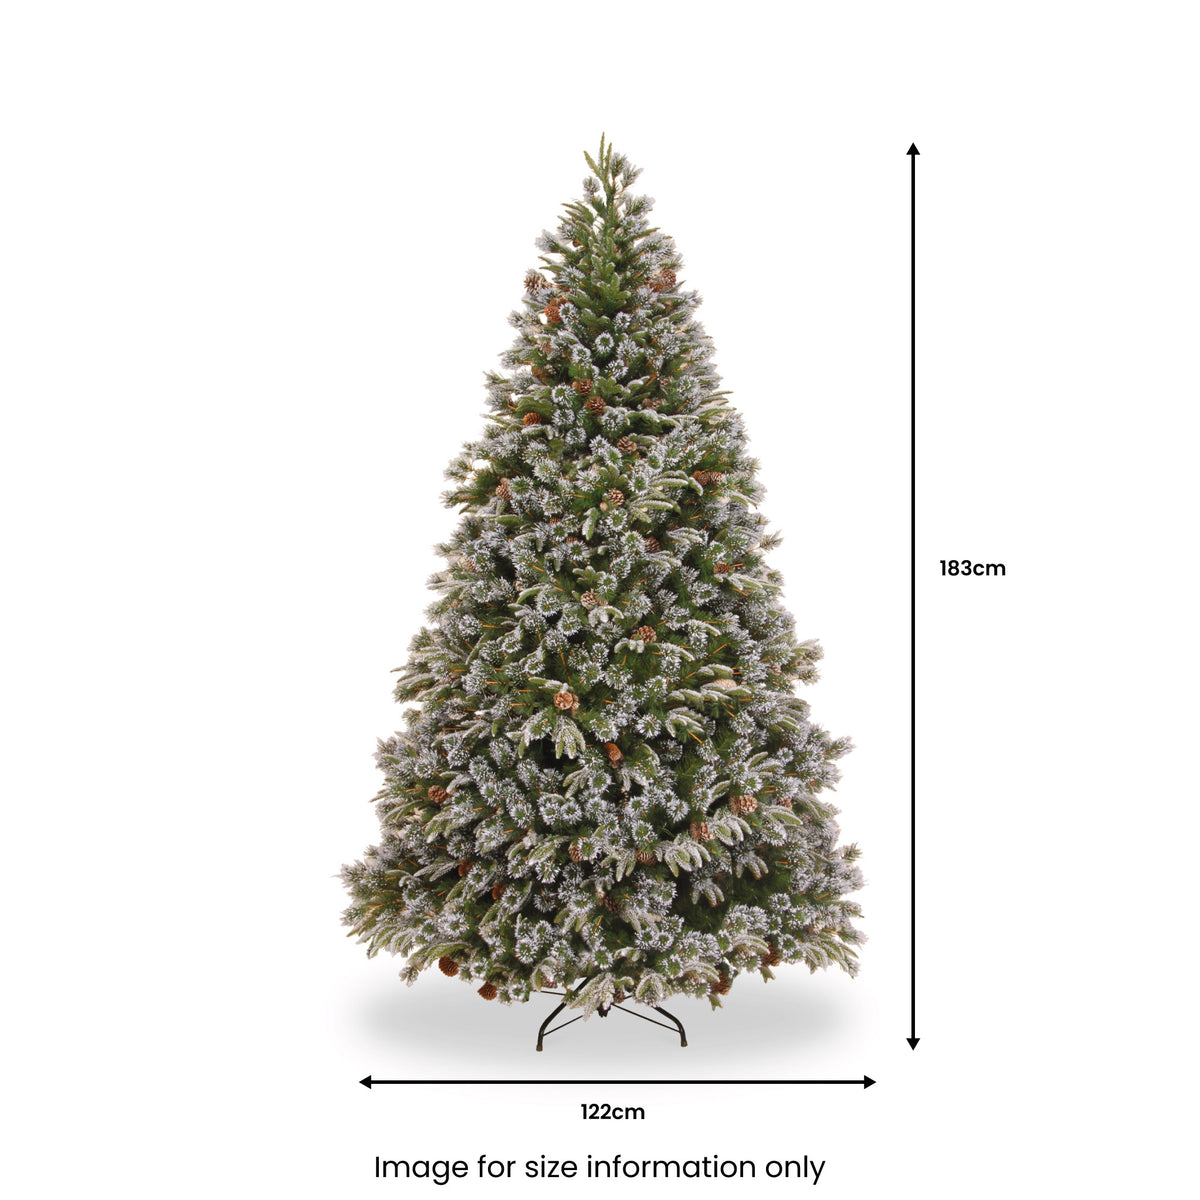 Liberty Pine 6ft Christmas Tree with Snow & Cones from Roseland